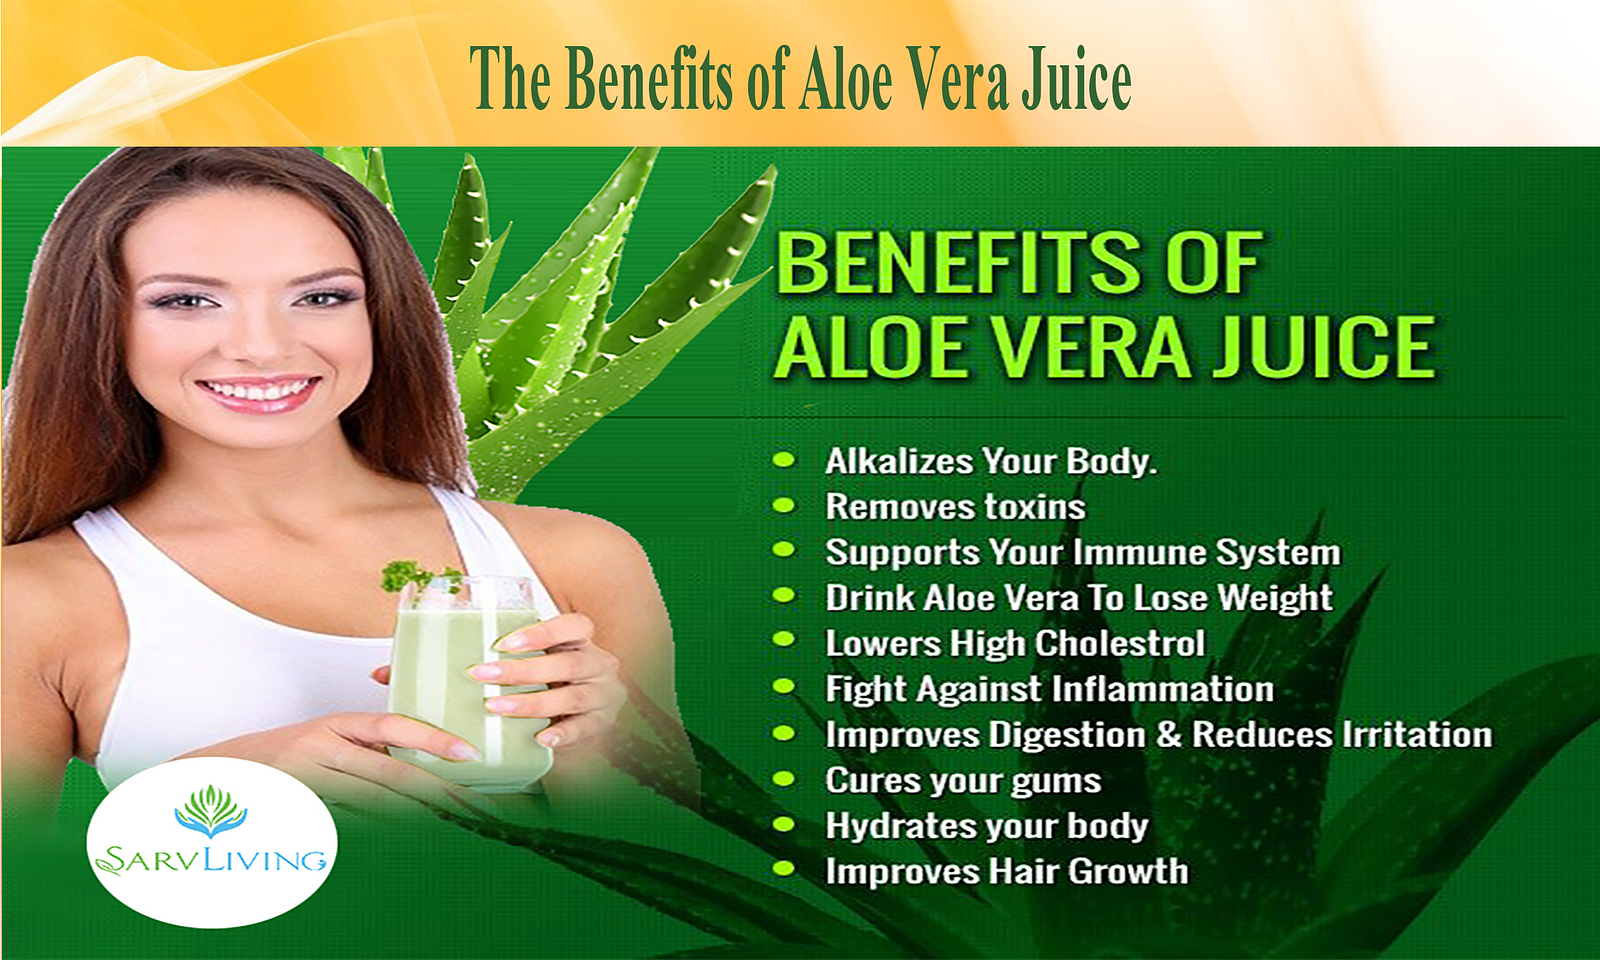 Aloe Vera Juice for Hair Really Works Wonders for the Scalp